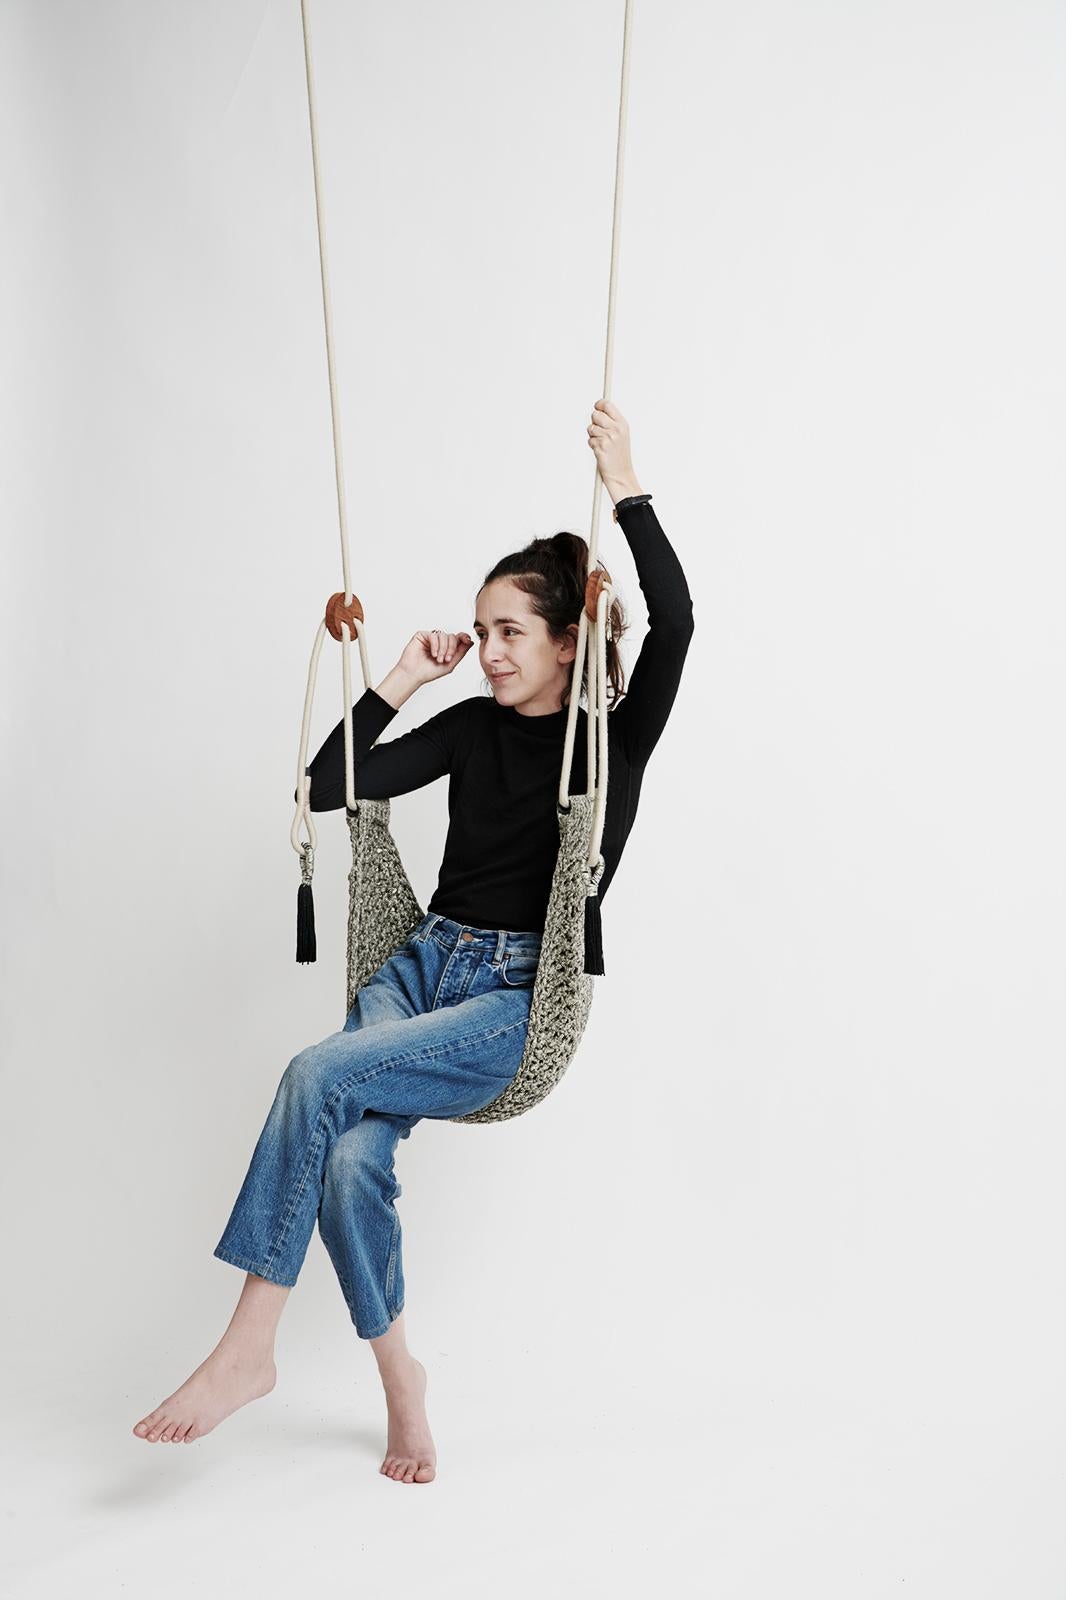 The iota outdoor swing is inspired by climbing plants and branches in the summer, when the weather is dry. The colors are inspired by a Scandinavian pallet, dunes and naked trees. They aim to take the user to a wild, natural, fantastic place. The